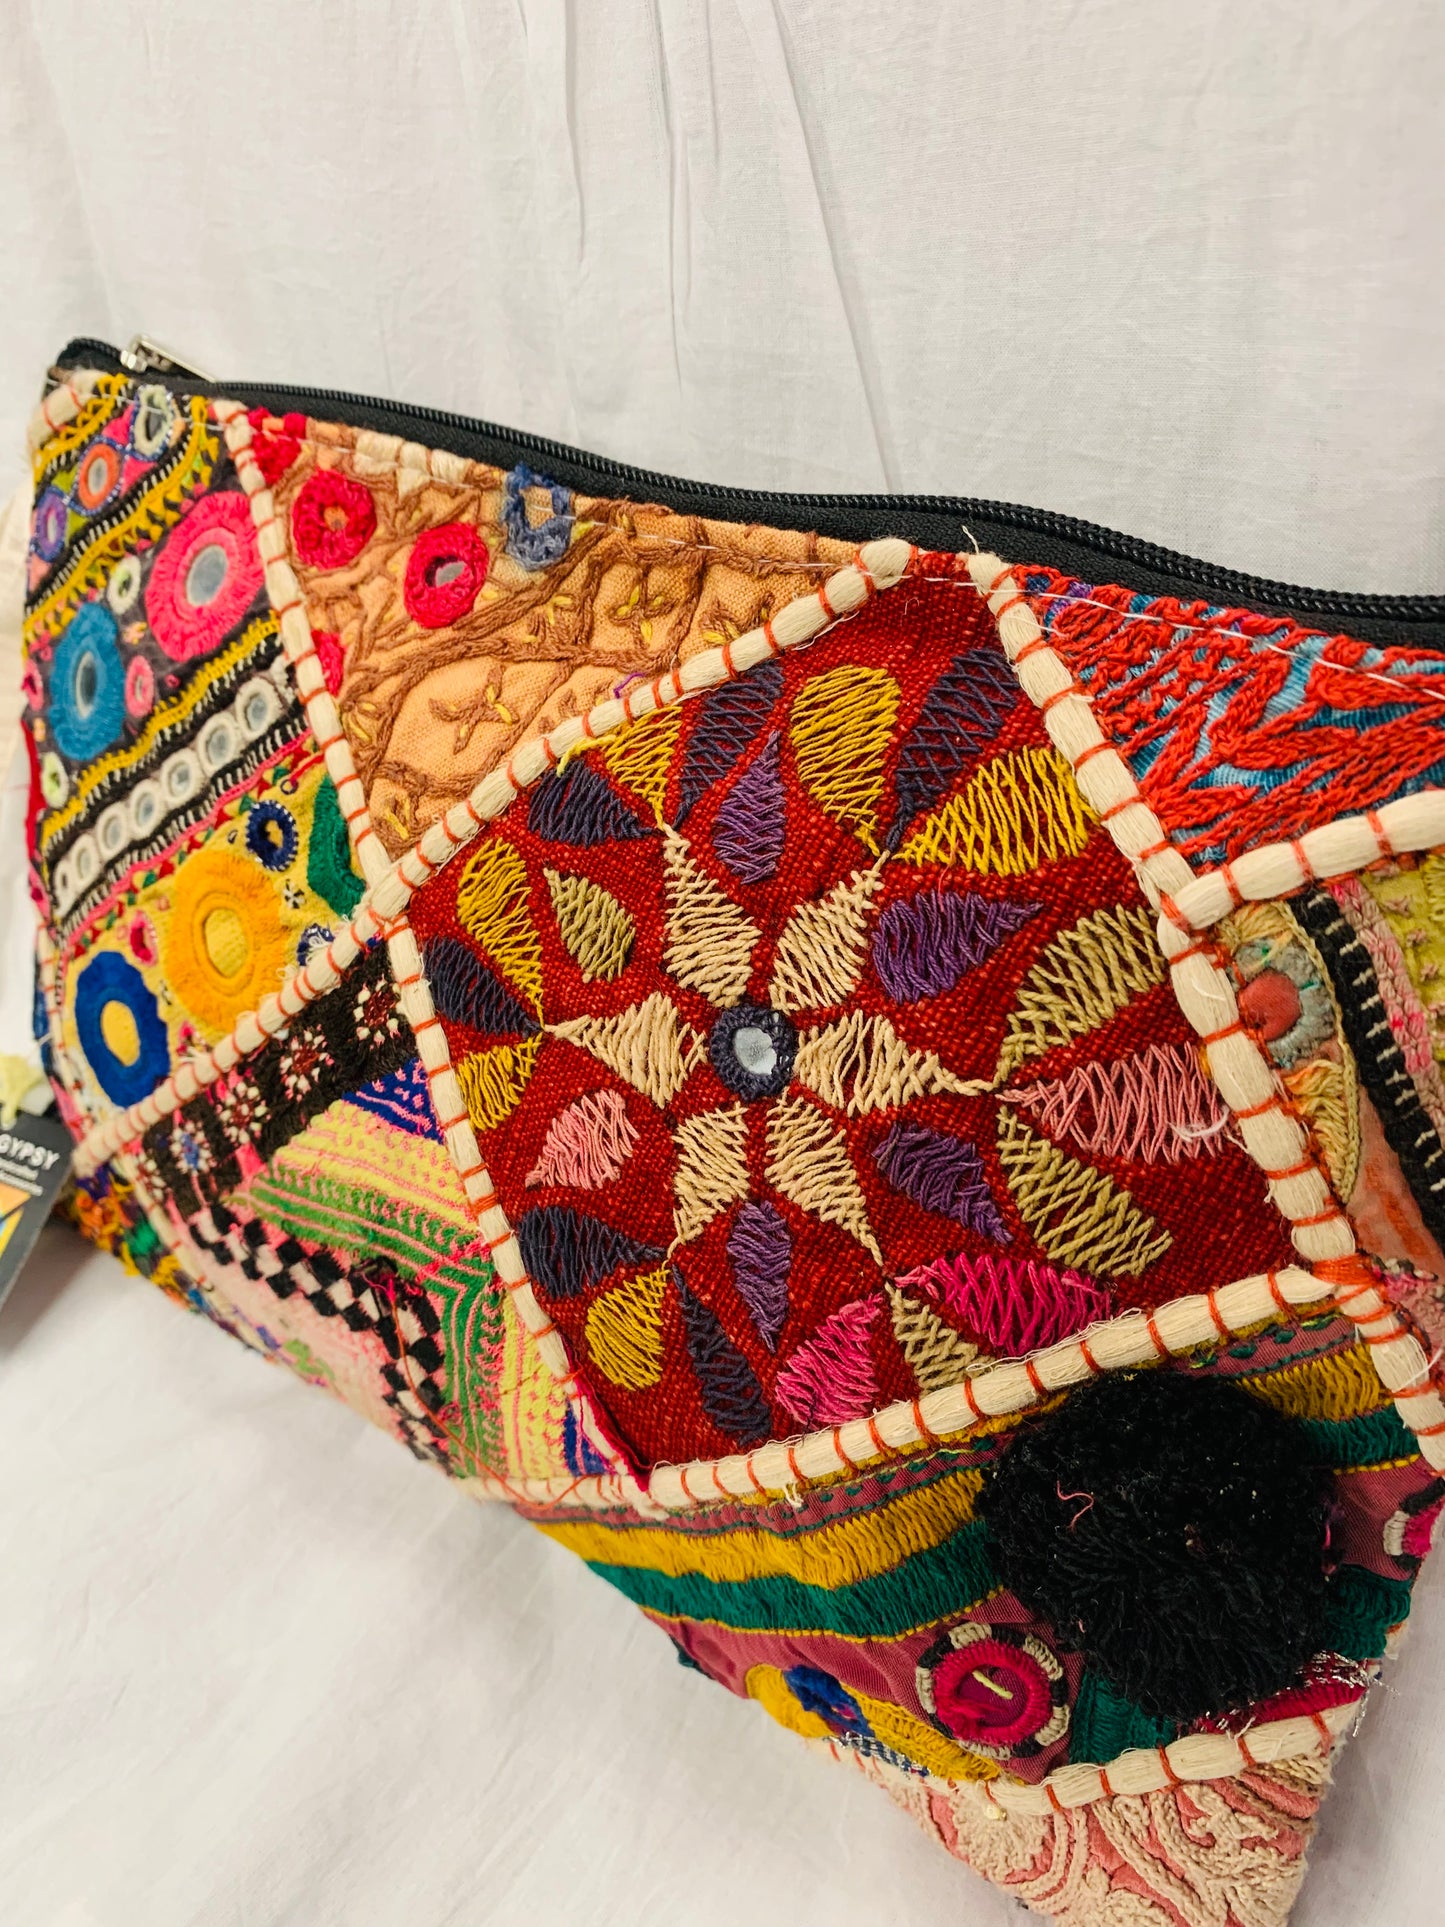 Bohemian style handcrafted Patchwork Clutch # 757847